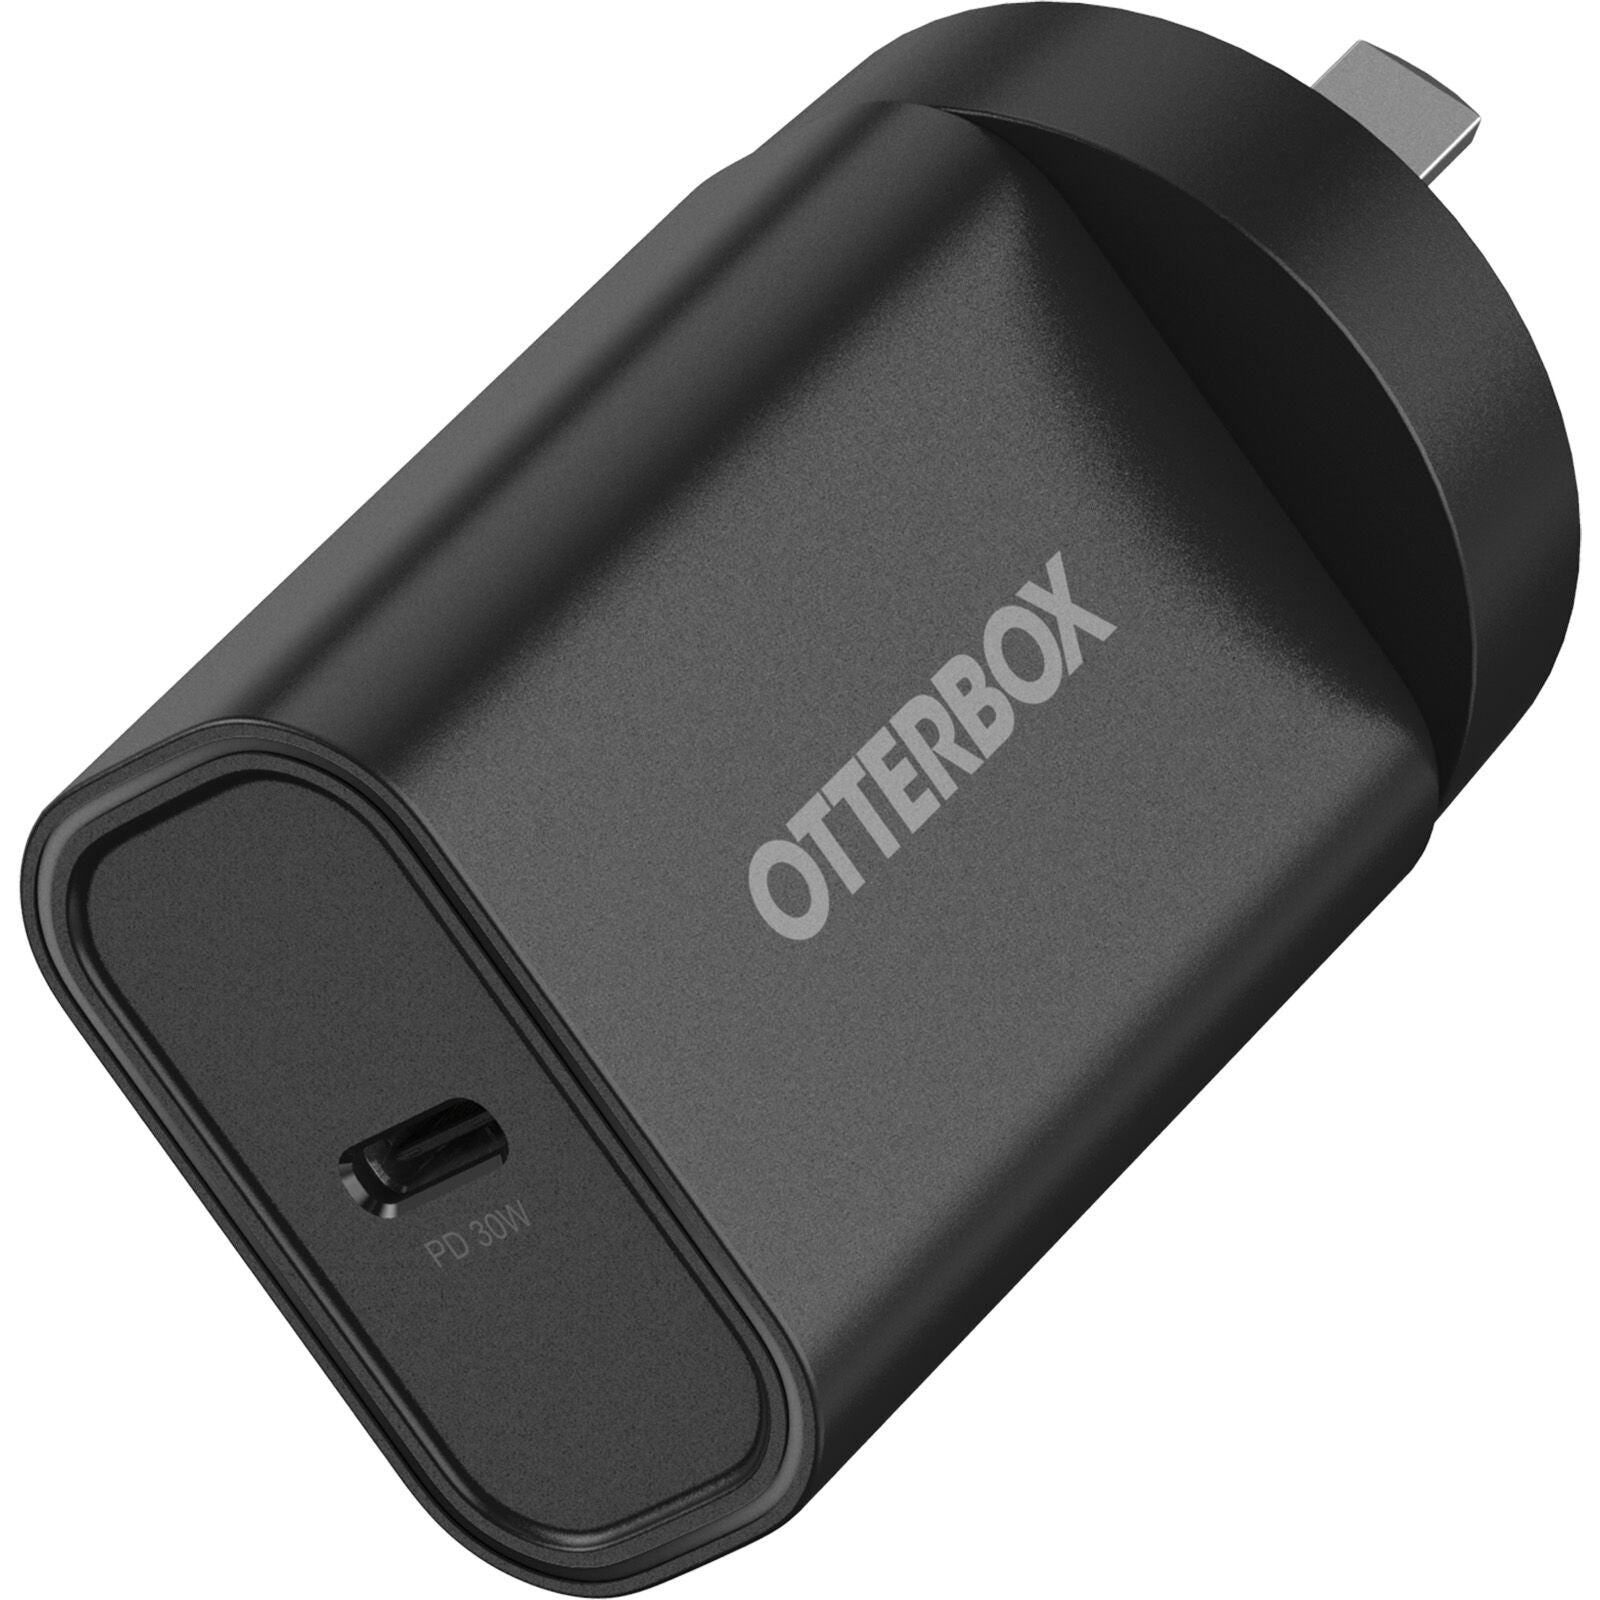 OtterBox 30W USB-C (Type I) PD Fast Wall Charger - Black (78-81351), Compact, Drop Tested,Safe & Smart Charging,Best for Apple,Samsung & USB-C Devices